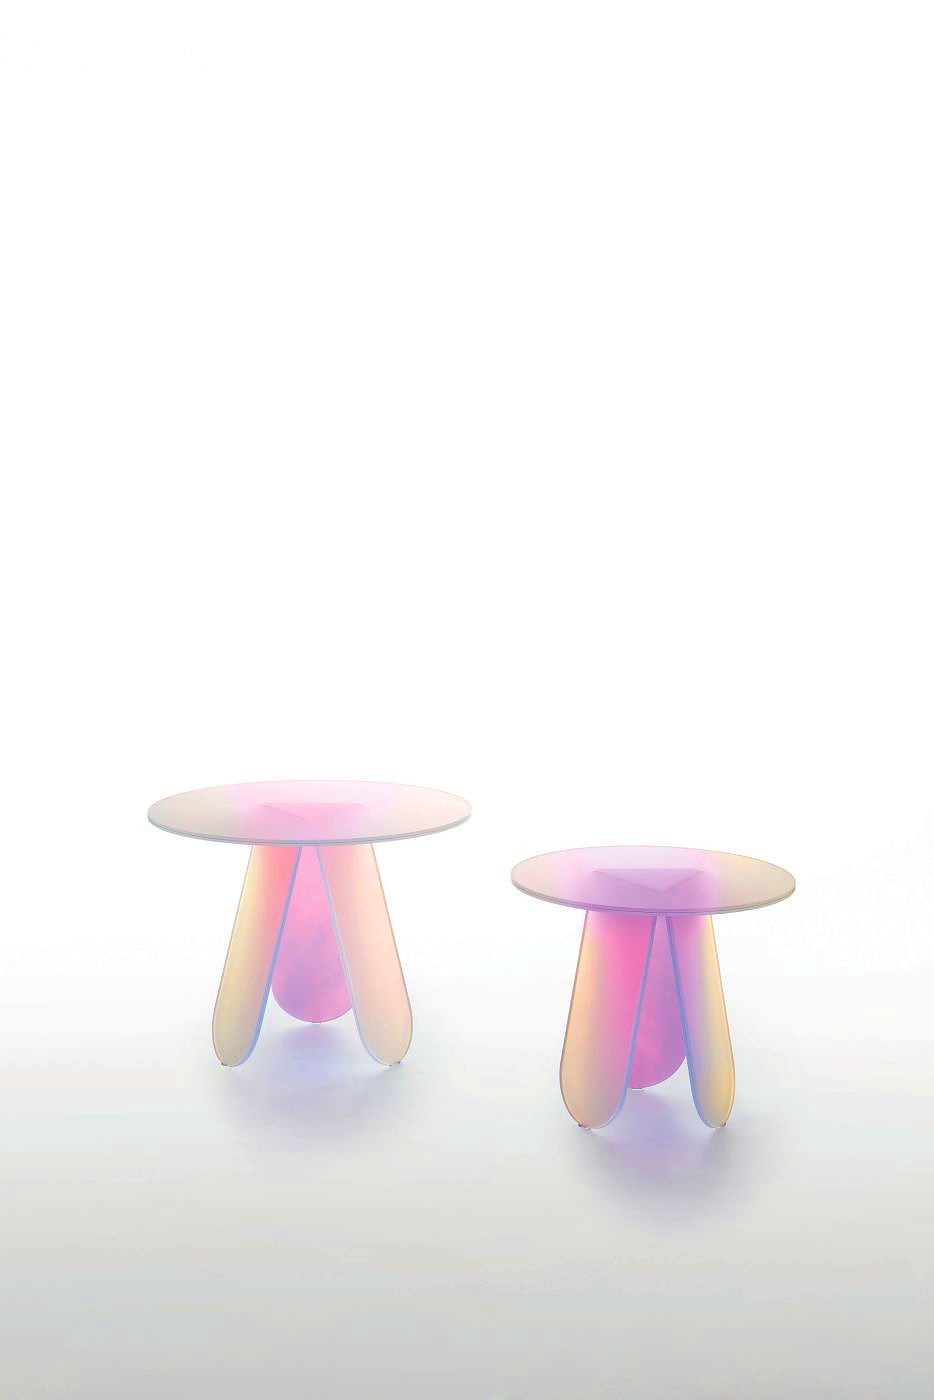 Shimmer Table Collection by Patricia Urquiola